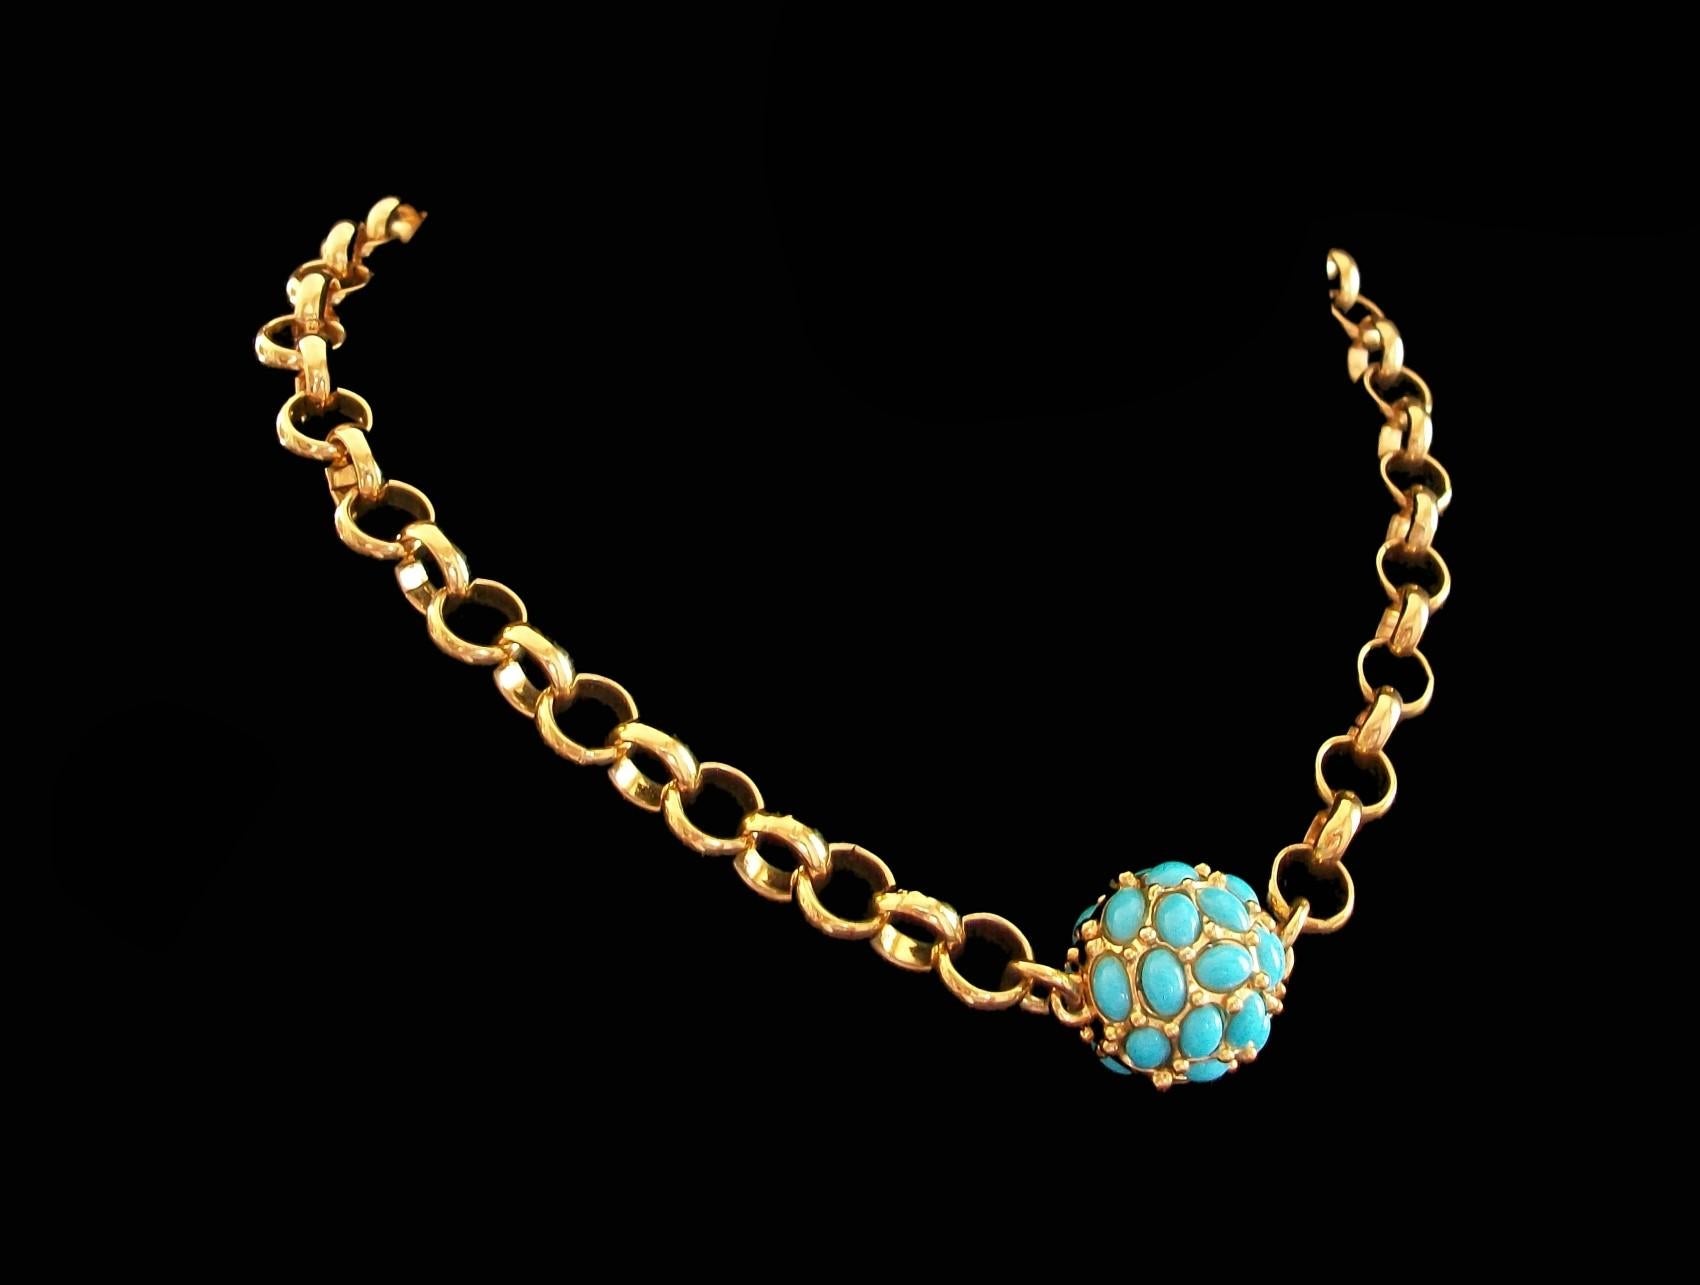 KENNETH JAY LANE - Vintage large scale gold plated round link statement necklace with pave set faux turquoise center ball - fine quality workmanship and details from an American master jewelry designer - featuring an adjustable length with a 2 1/2